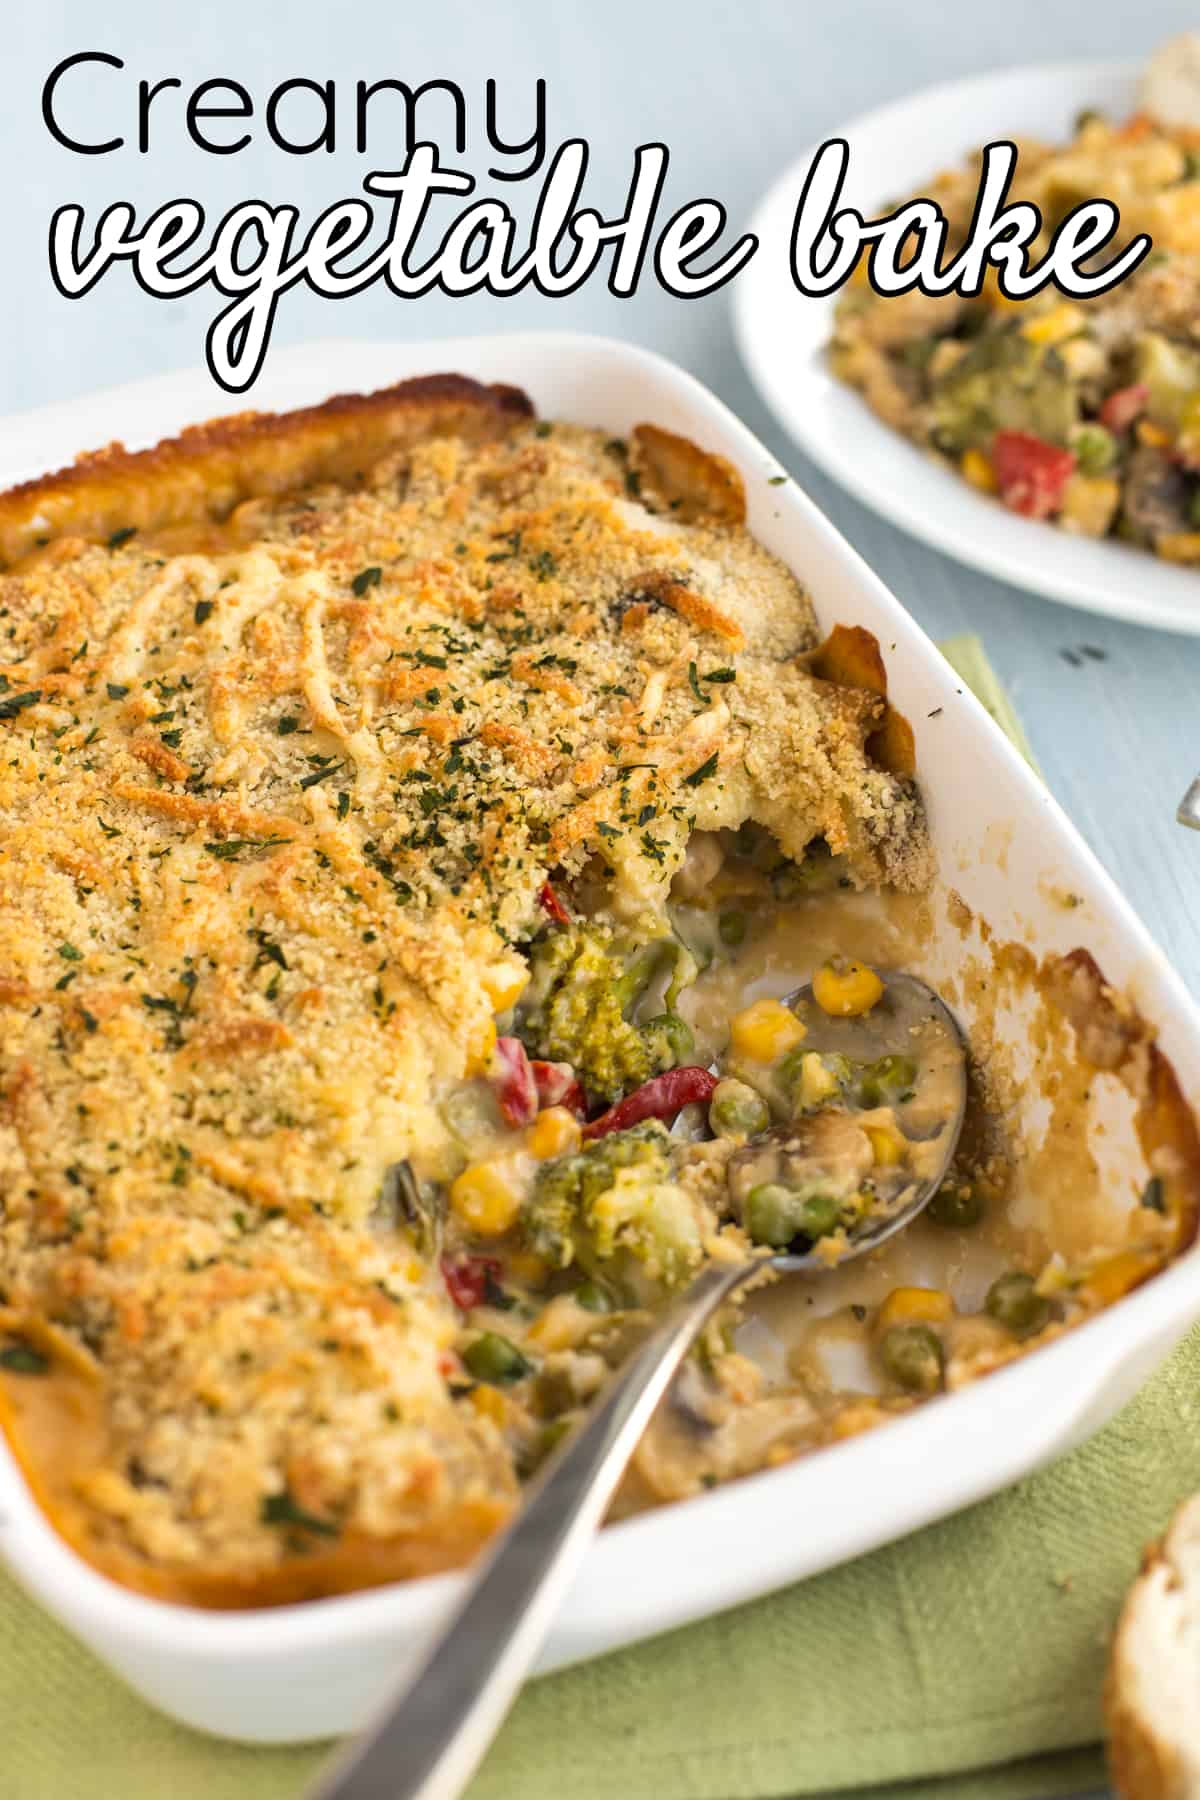 Creamy vegetable bake in a baking dish with a large spoonful removed.